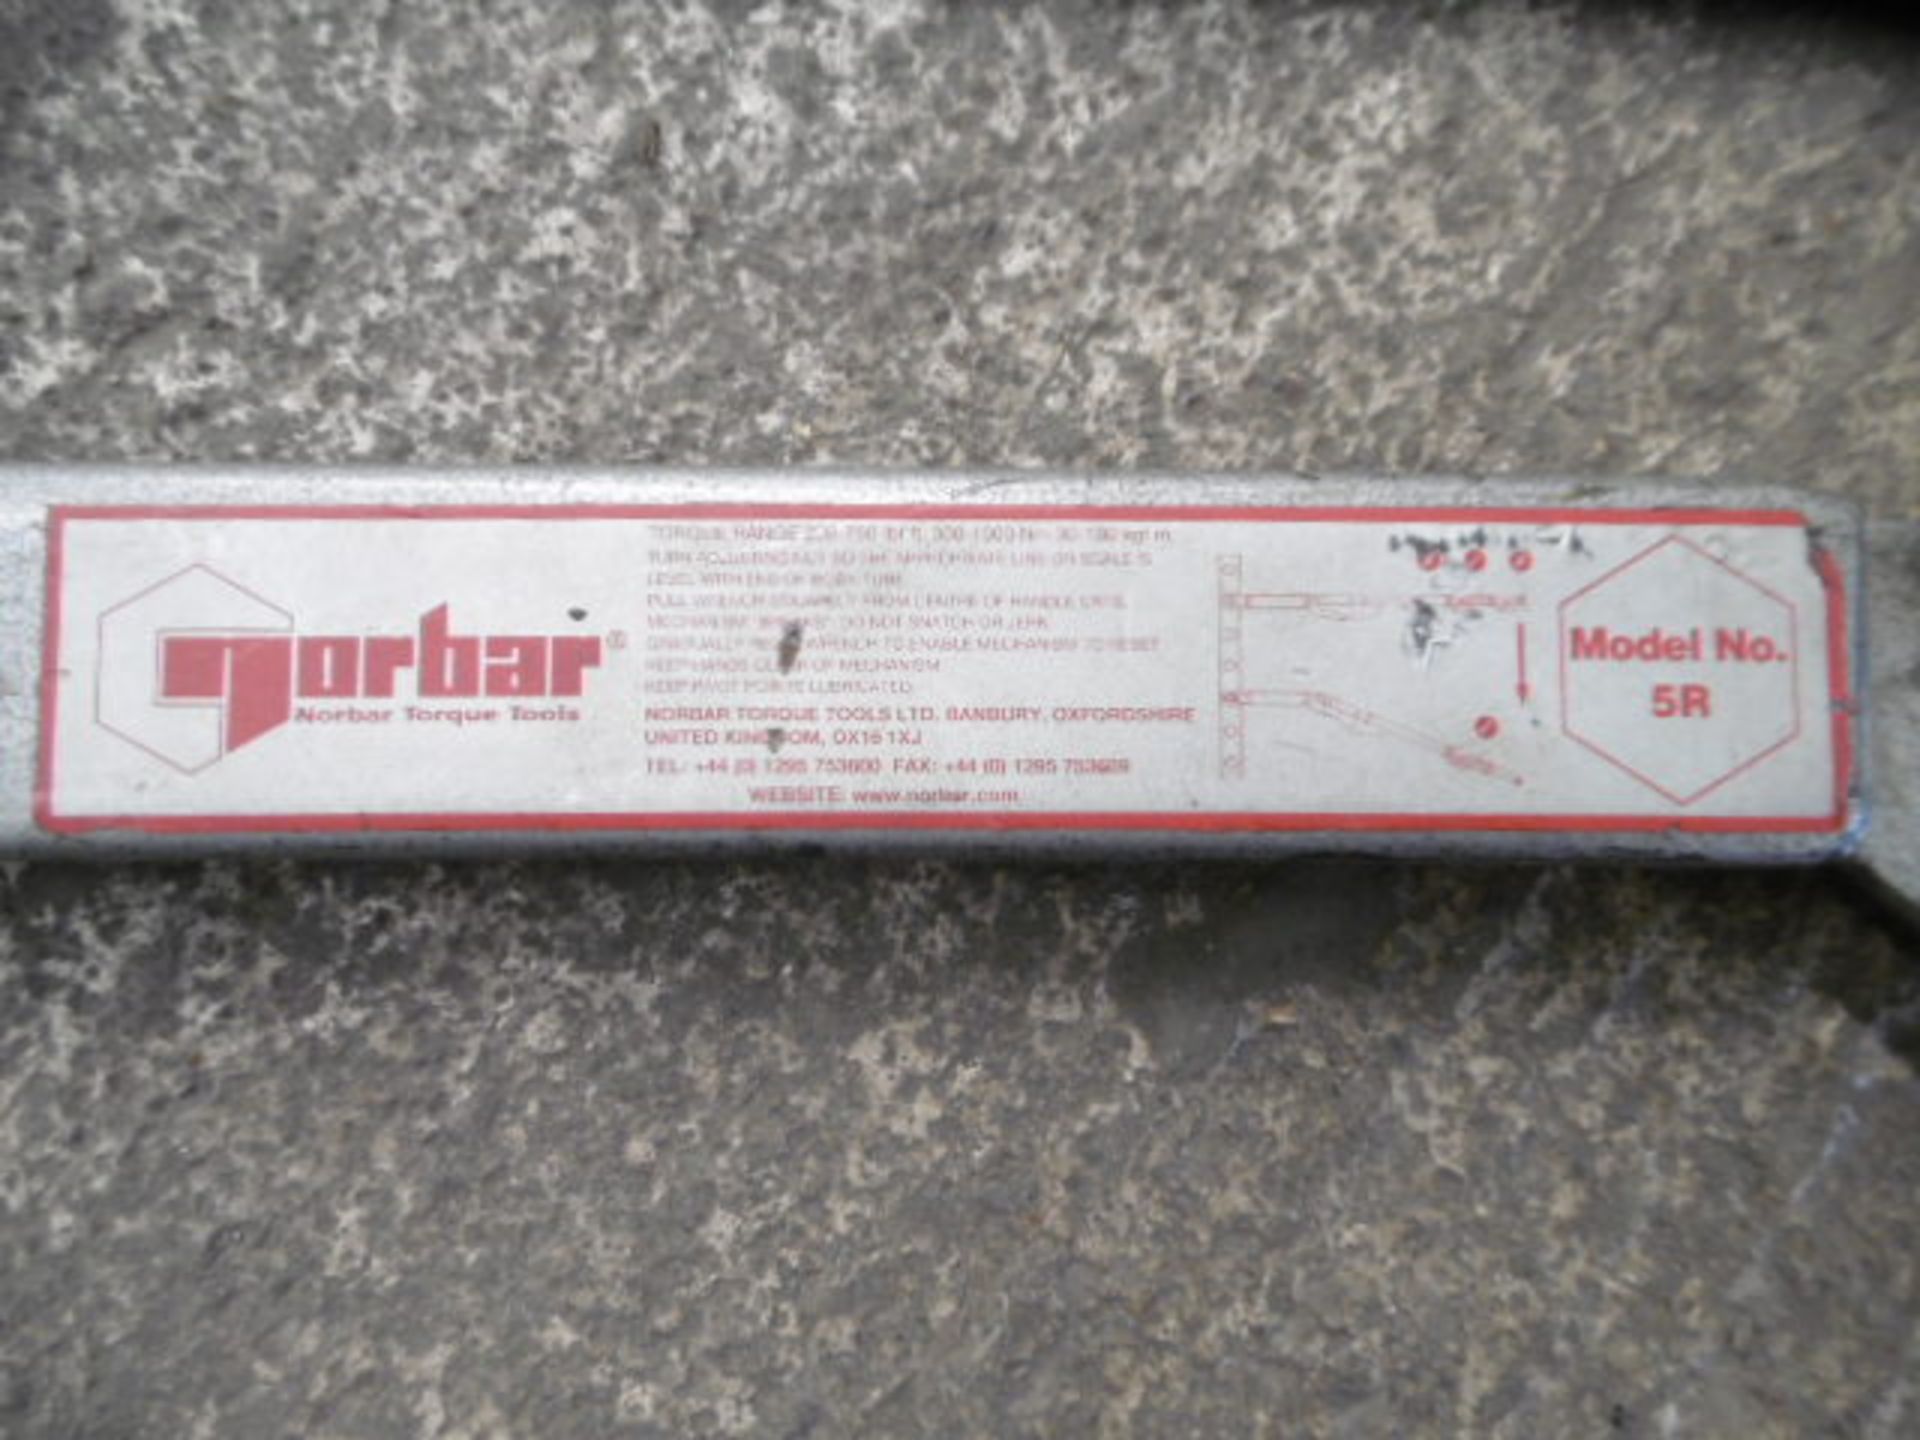 Norbar 5R Torque Wrench - Image 3 of 6